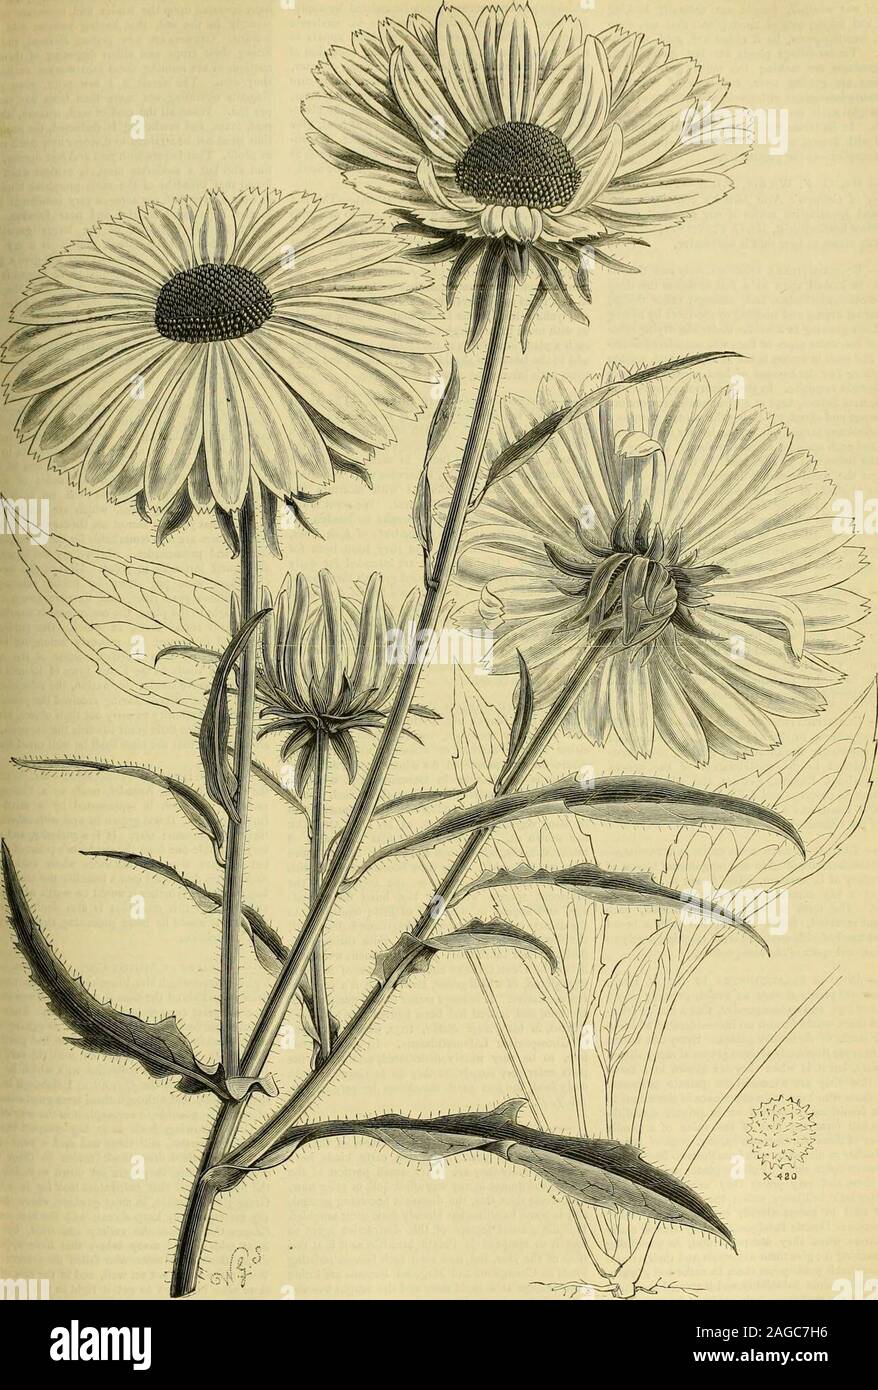 . The Gardeners' chronicle : a weekly illustrated journal of horticulture and allied subjects. y and quantity being satisfactor)but it is expected all will be sold, there being suchlarge demand for it in the United States. Of Dadlis glomerata there is a short crop, but of excellequality. The supply of Festuca pratensis will be smalbut the quality is extra fine. The crop of Agrosistolonifera is a poor one. Of Timothy-grass and whiand Alsike Clover the crops are short and prices ulusually high. At present the probable crop of rlClover can scarcely be determined, but it cannot jexcessive, and the Stock Photo